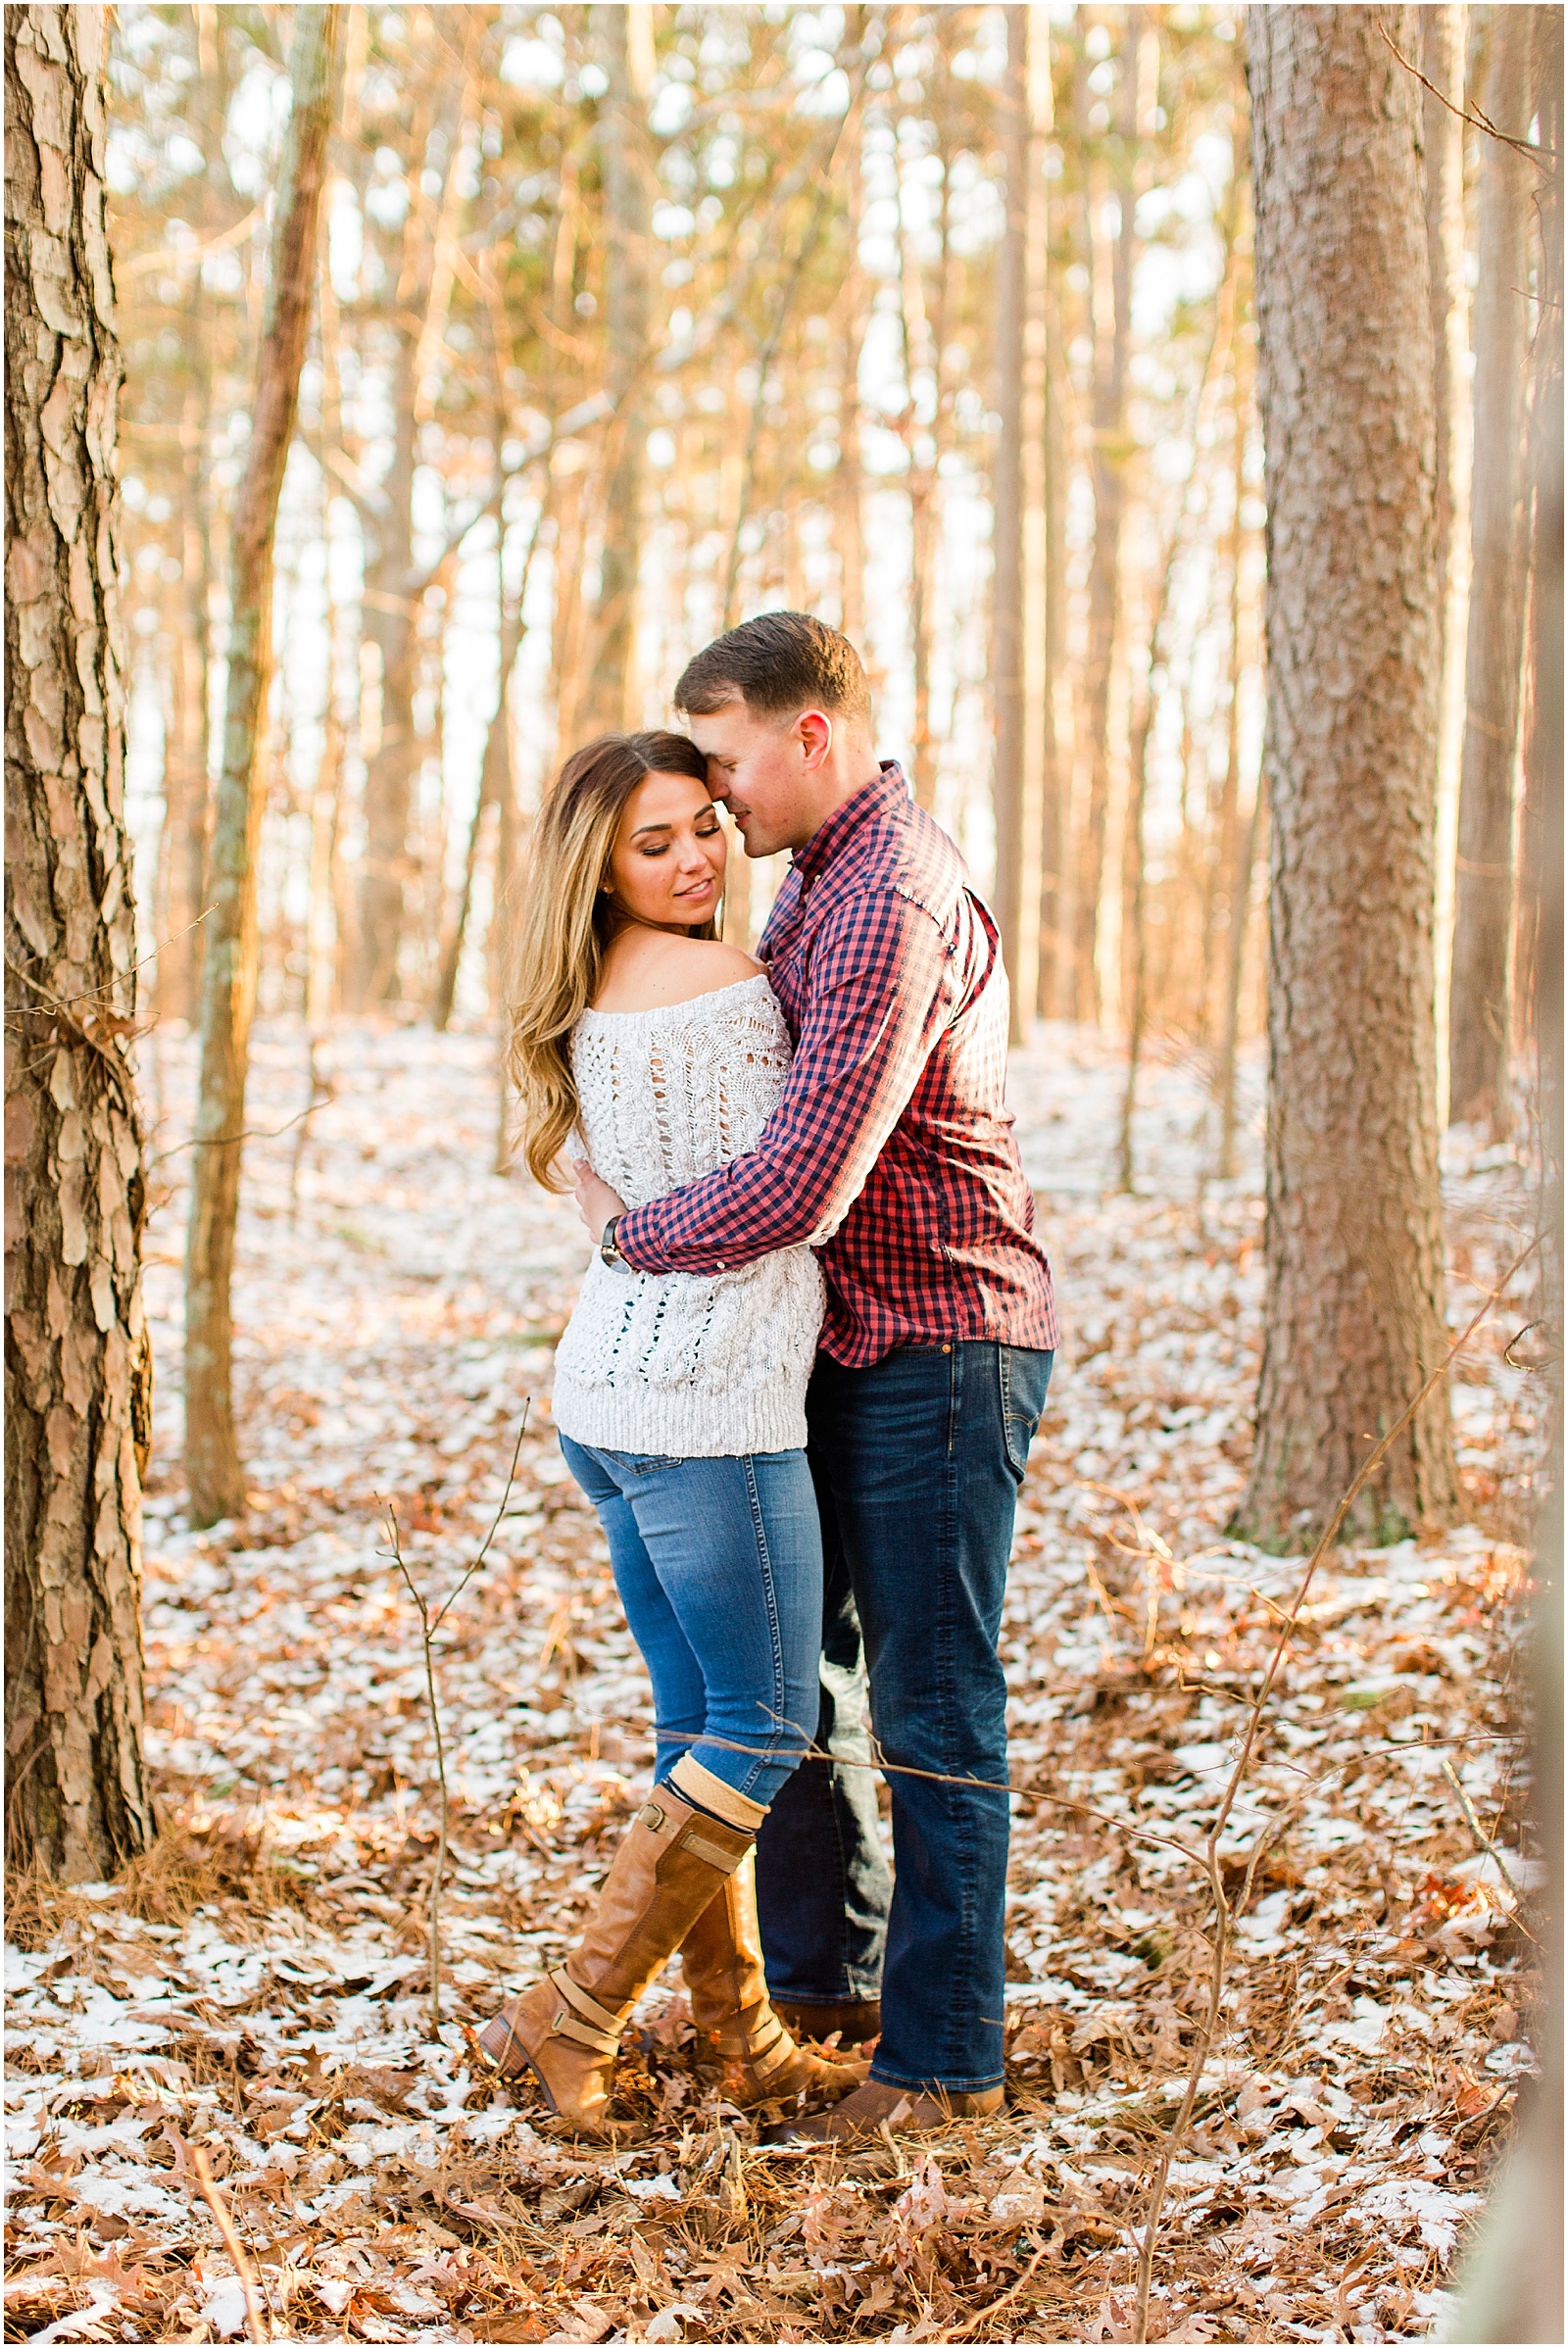 A Sunny Garden of the Gods Engagement Session | Shiloh and Lee | Bret and Brandie Photography037.jpg